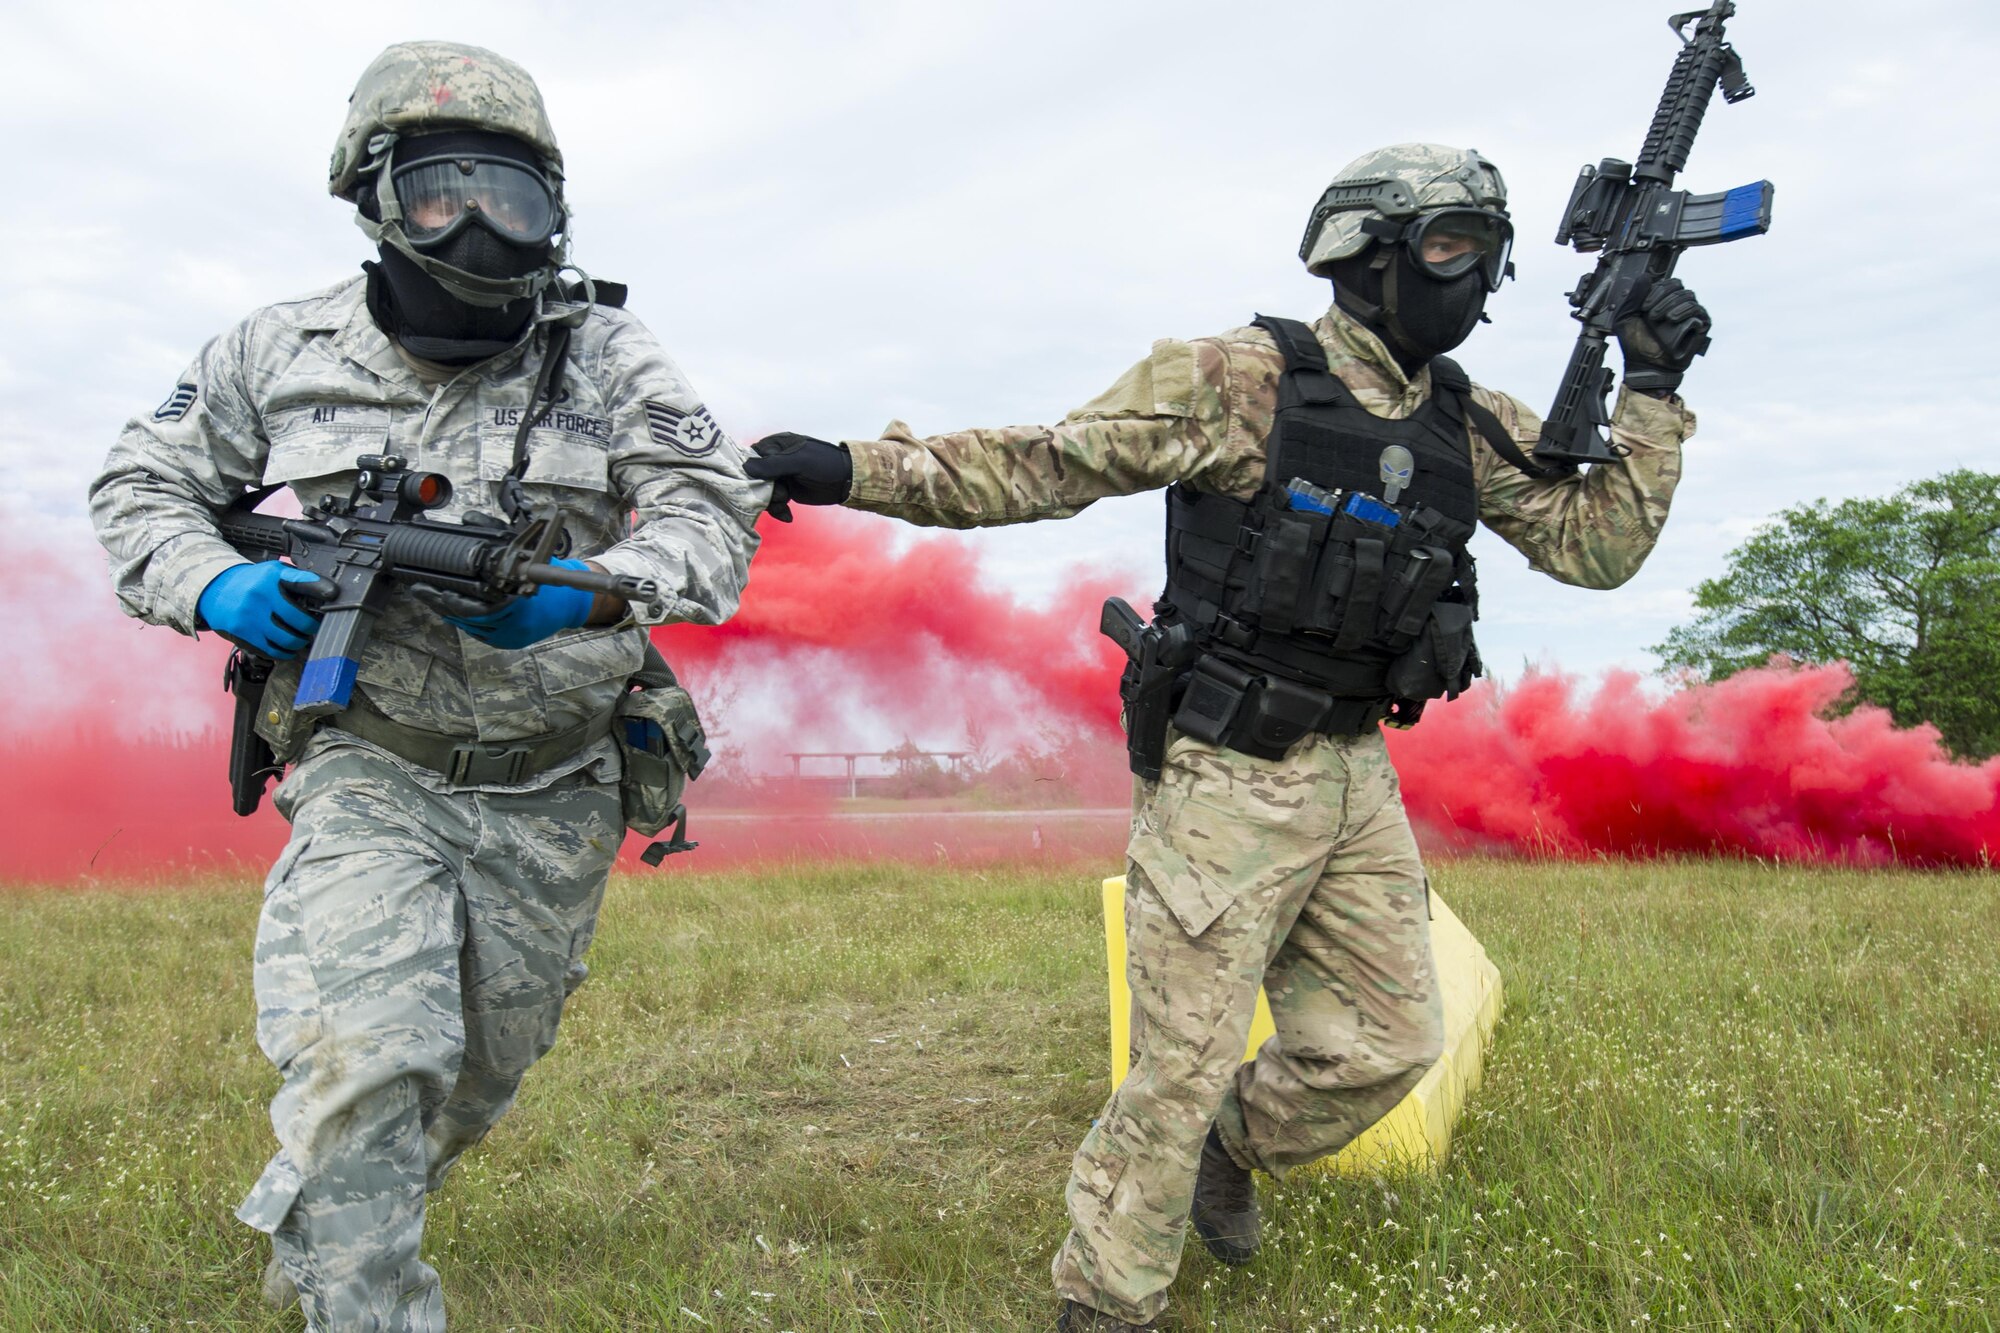 Reserve Citizen Airmen from the 482nd Security Force Squadron, Homestead Air Reserve Base, Florida, take cover and return fire while participating in a shoot, move, and communicate training with sim-munitions on September 26, 2017.  This annual training for security forces members helps keep the airmen proficient in many situation they may encounter stateside or overseas. (U.S. Air Force photo by Staff Sgt. Kyle Brasier)